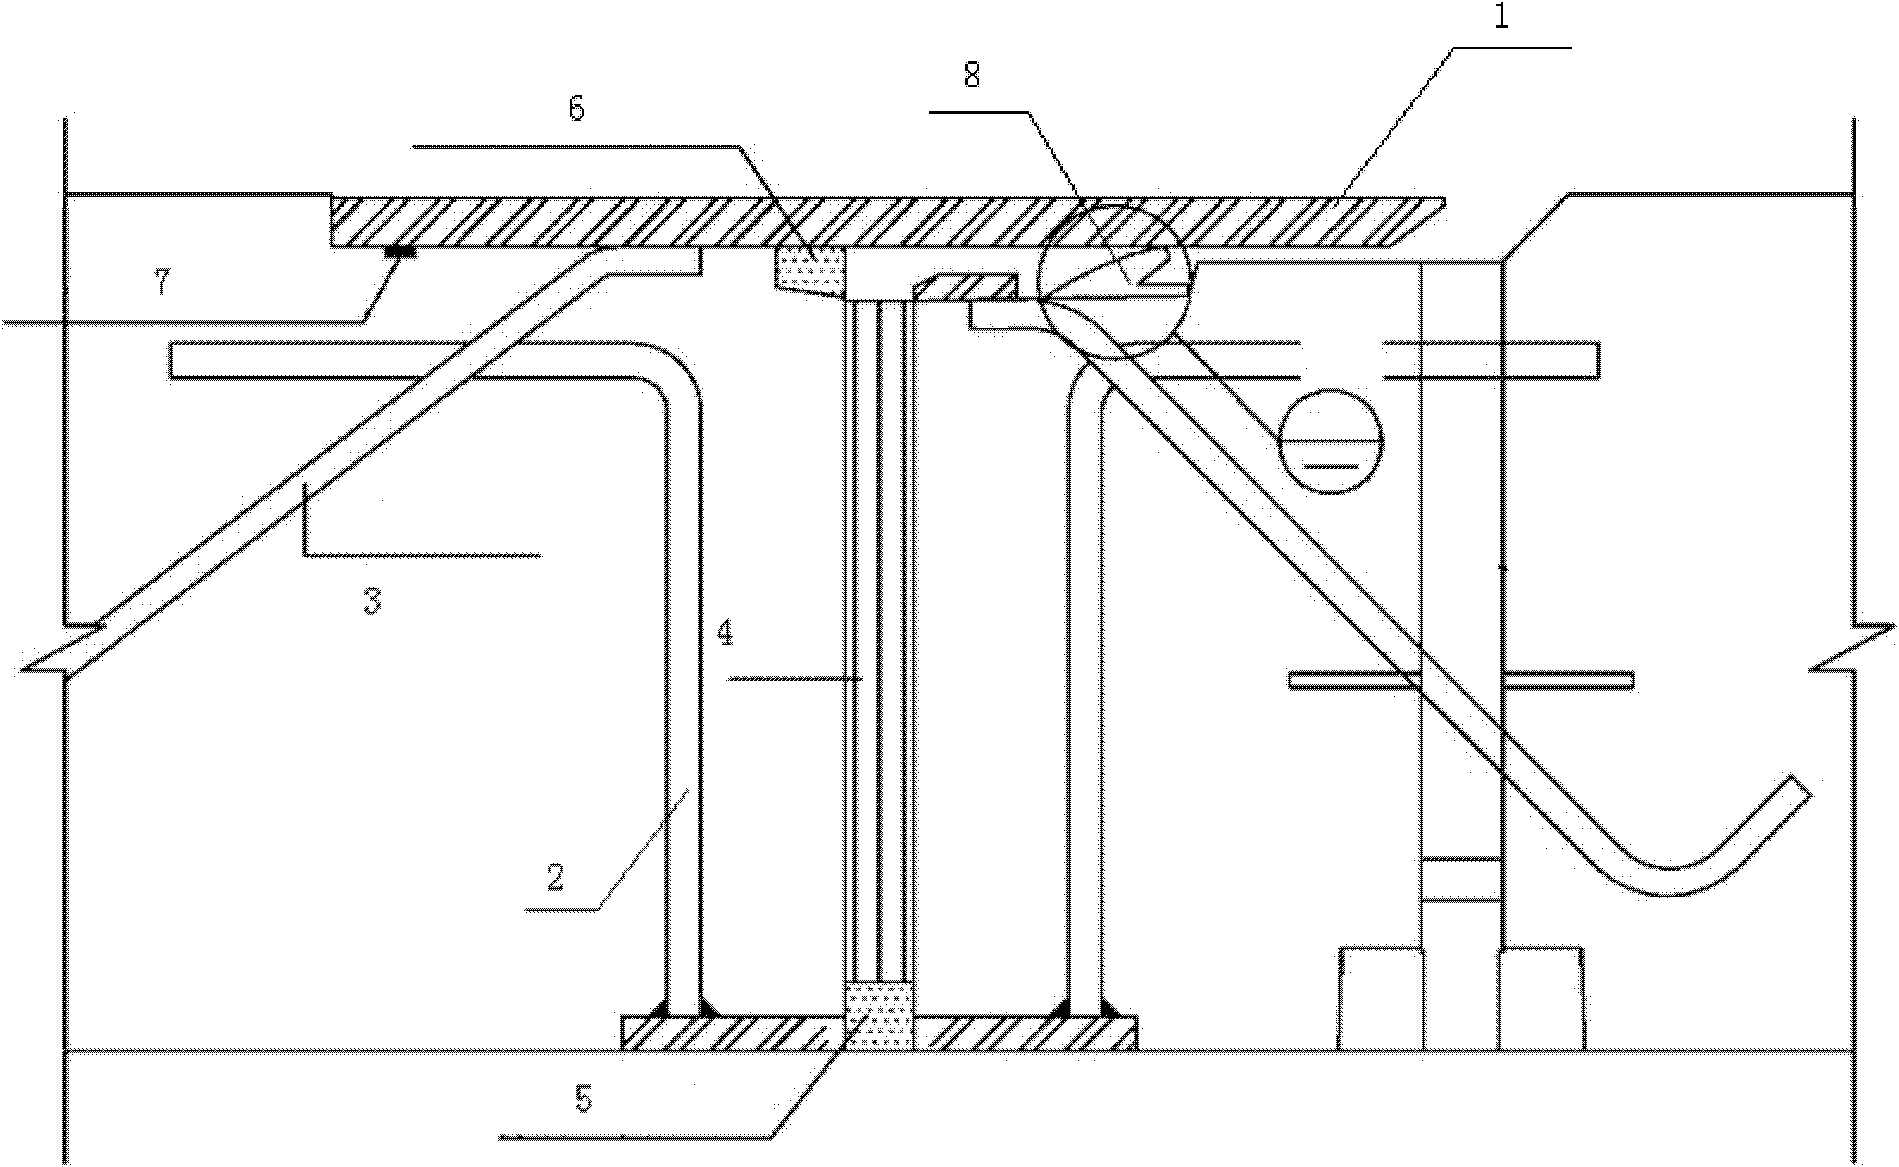 A waterproof structure for pipe-jacking tunnel joint connections